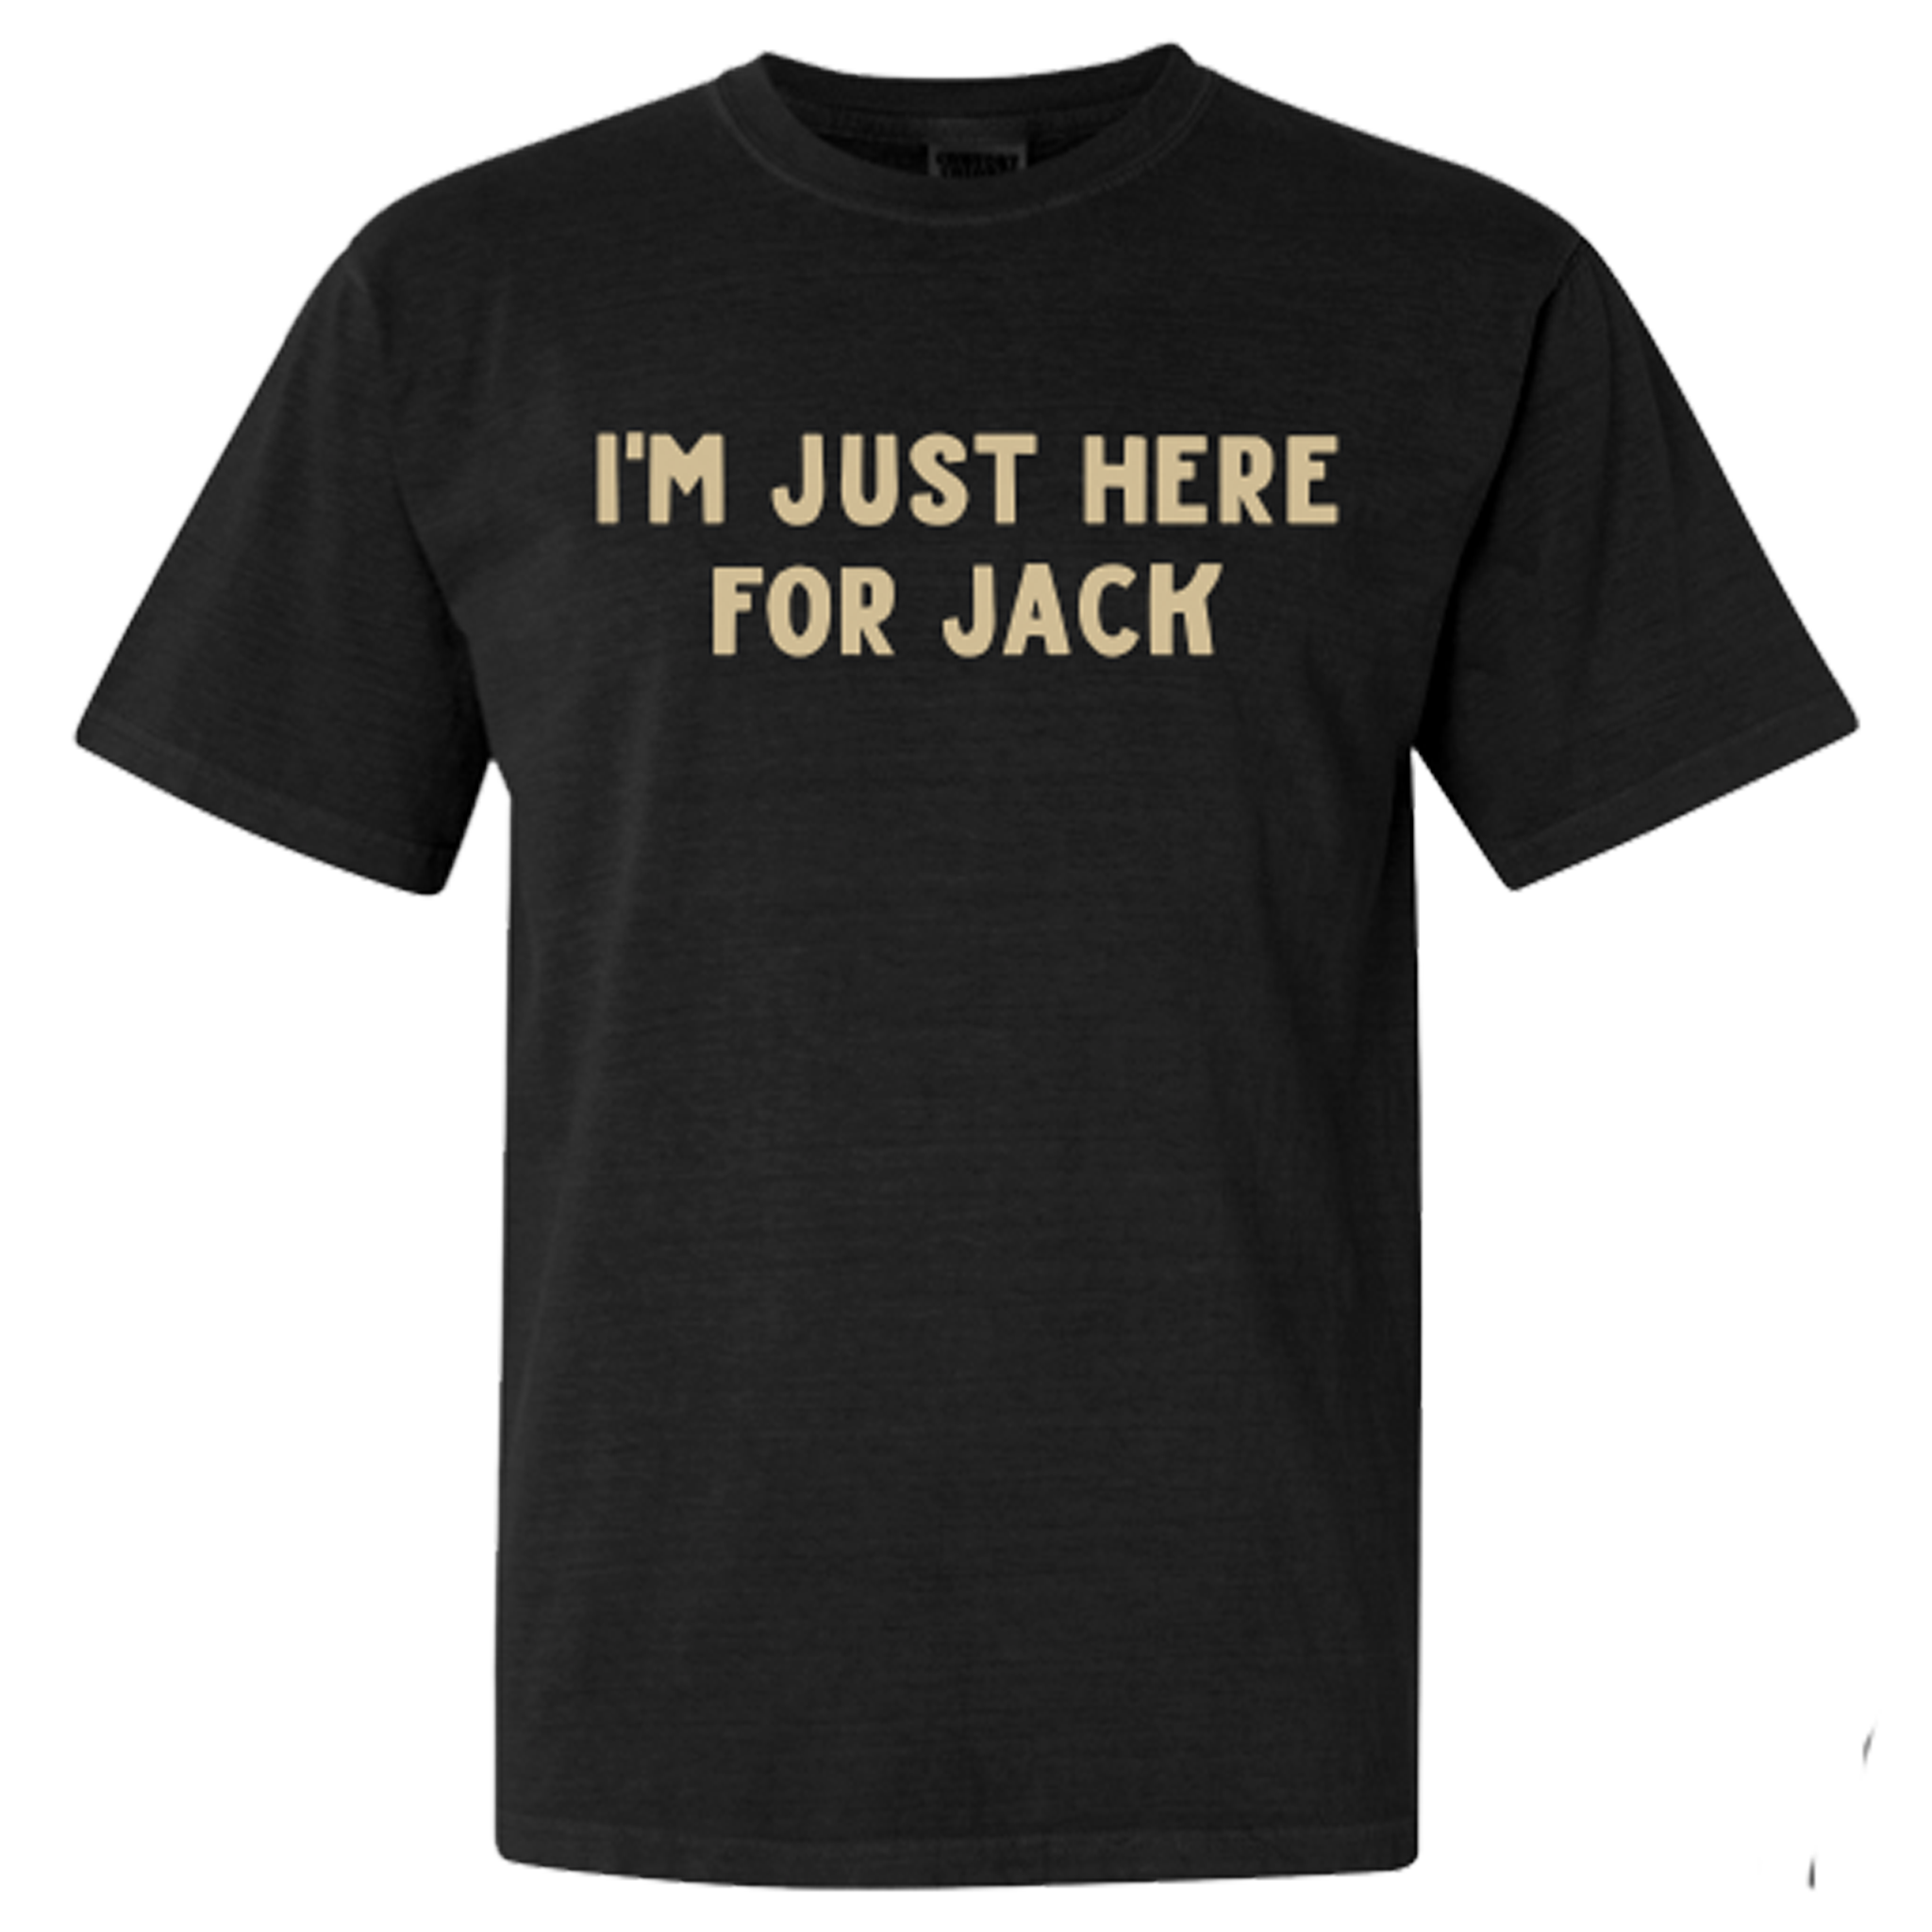 "I'm Just Here For Jack" Tee